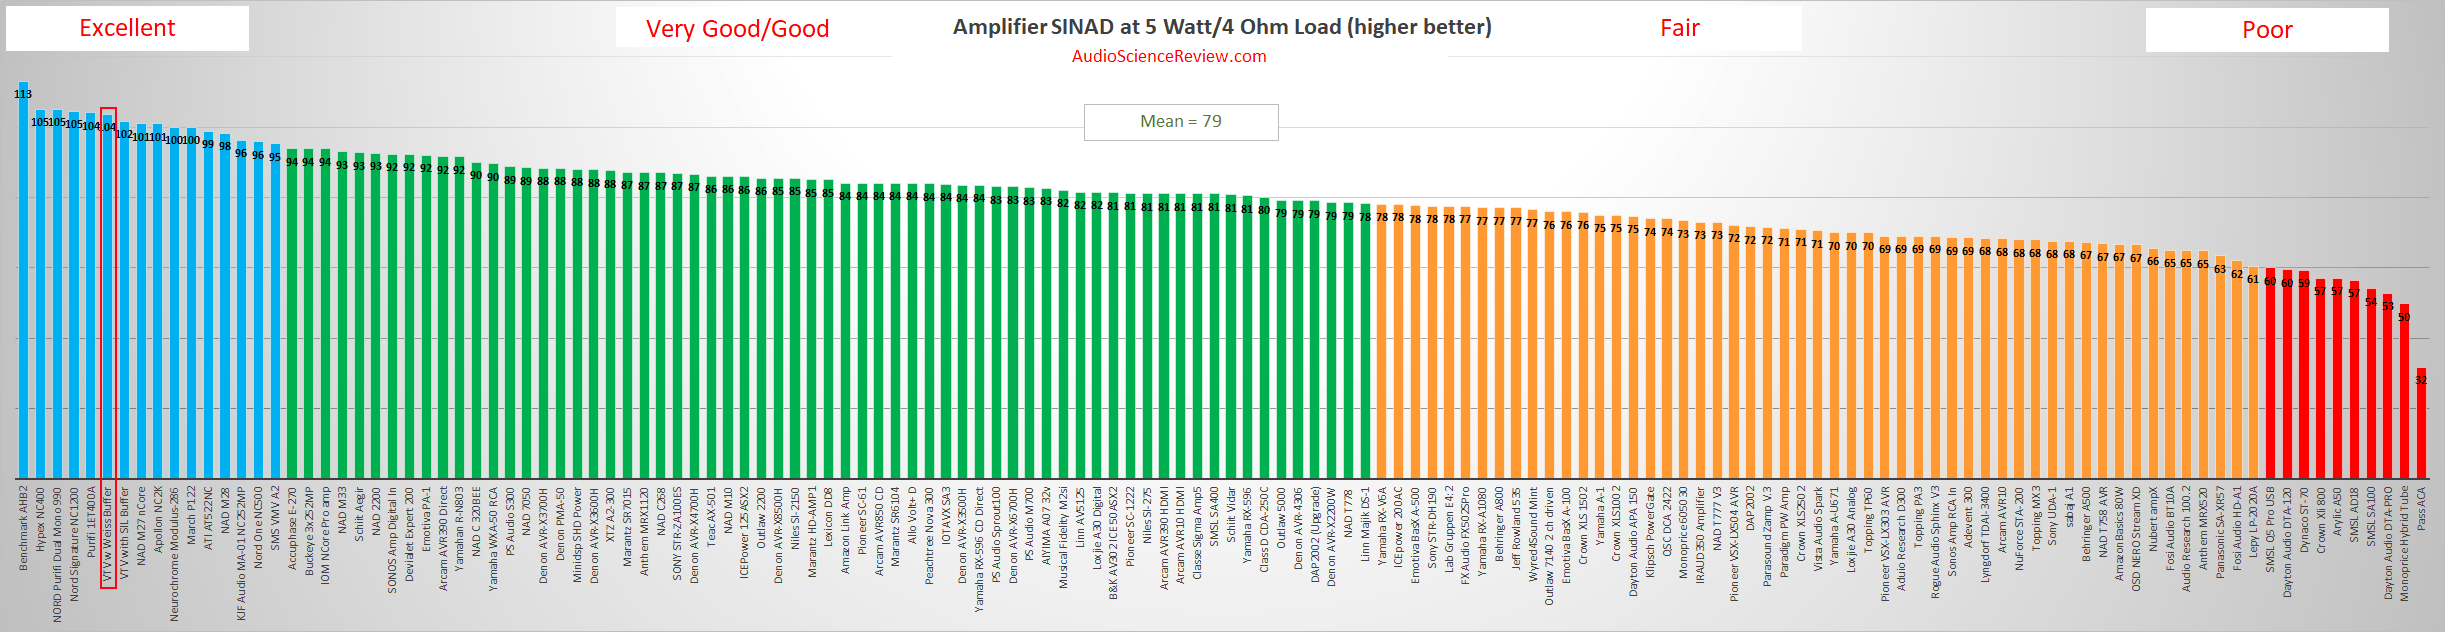 Best purifi amplifier tested.png